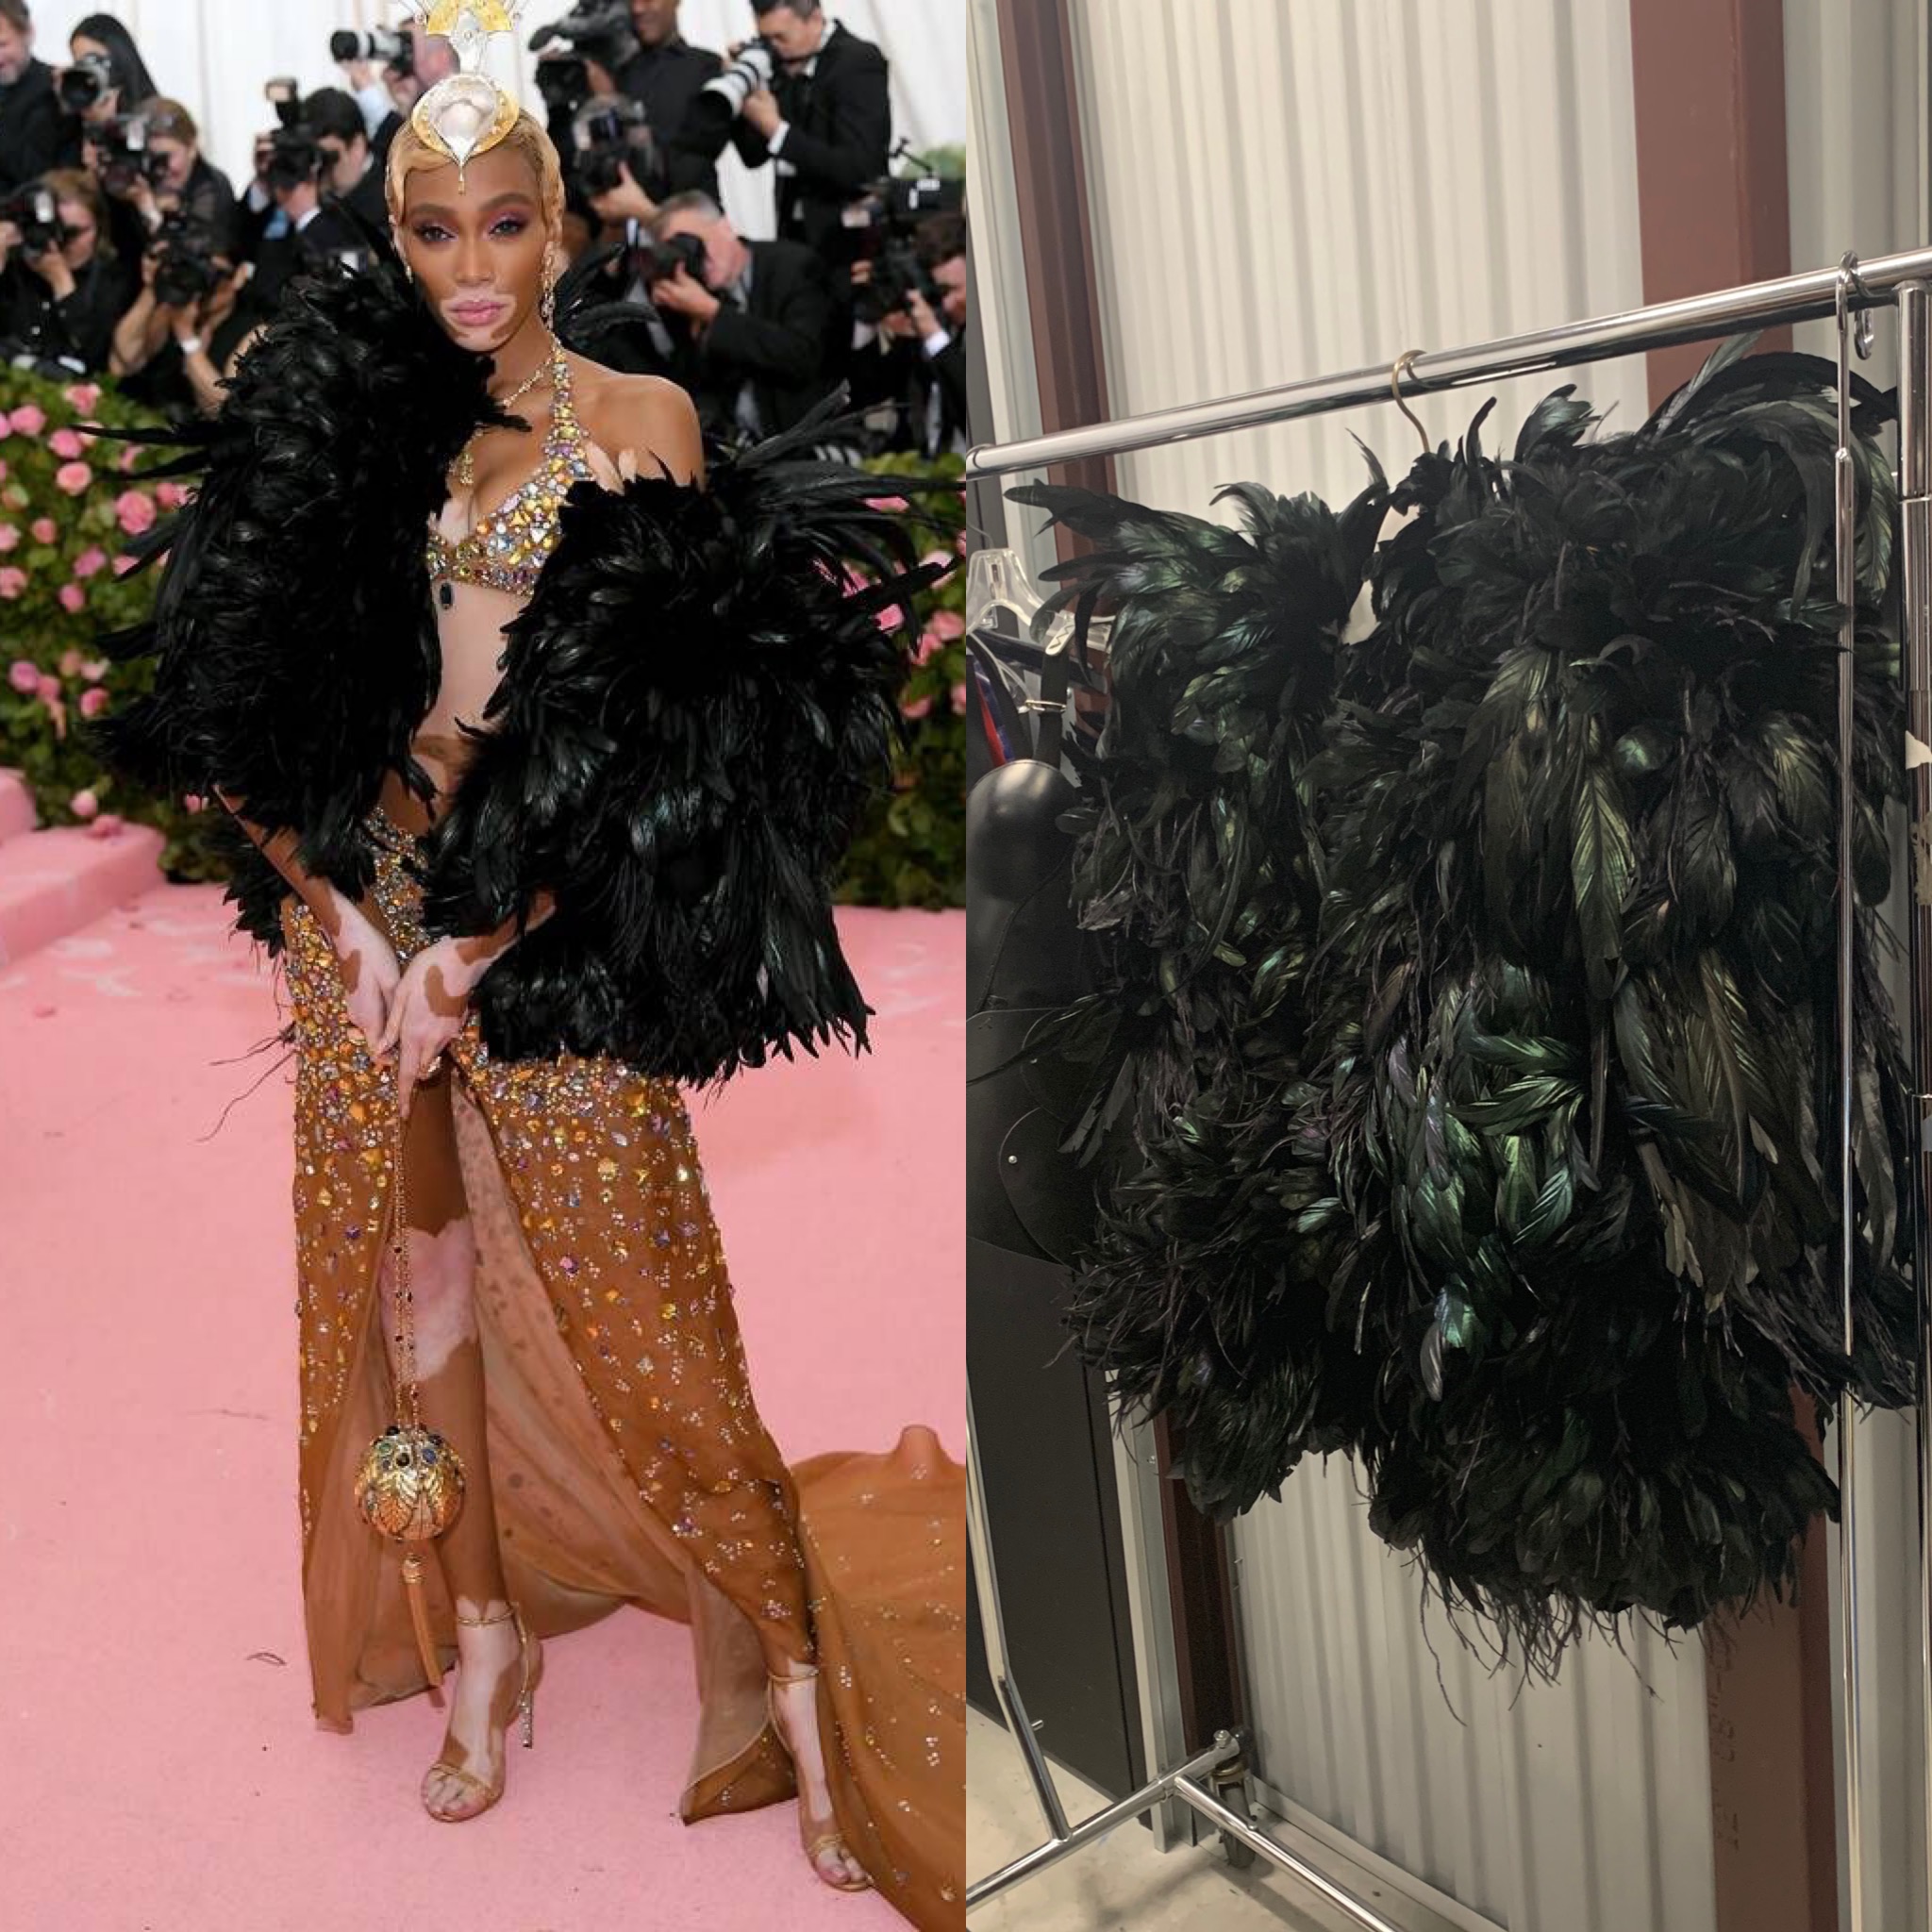 Actress Model Winnie Harlow rocking Tommy Hilfiger at the 2019 Met Gala "Camp"